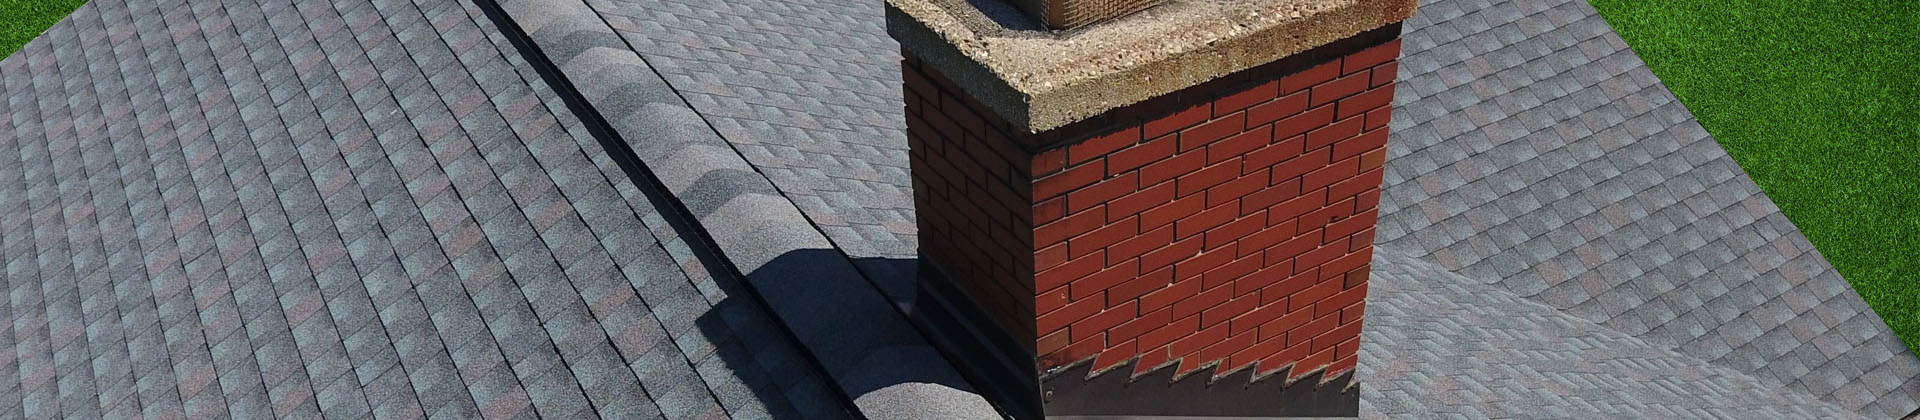 Matthews Roofing Chicago Residential Roof Estimate